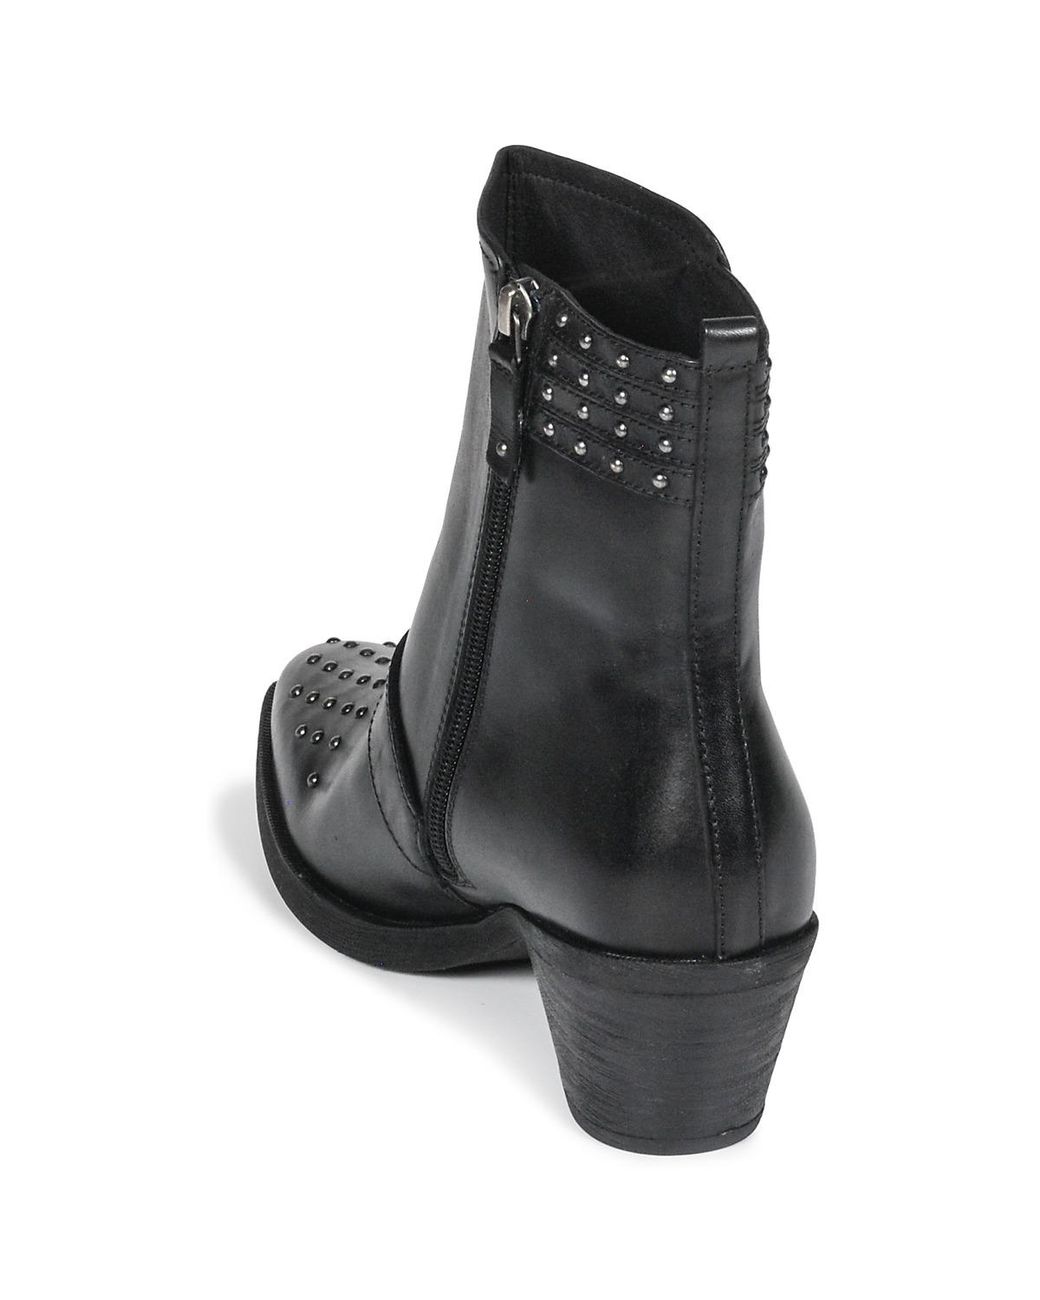 Geox D Lovai Low Ankle Boots in Black - Save 23% - Lyst